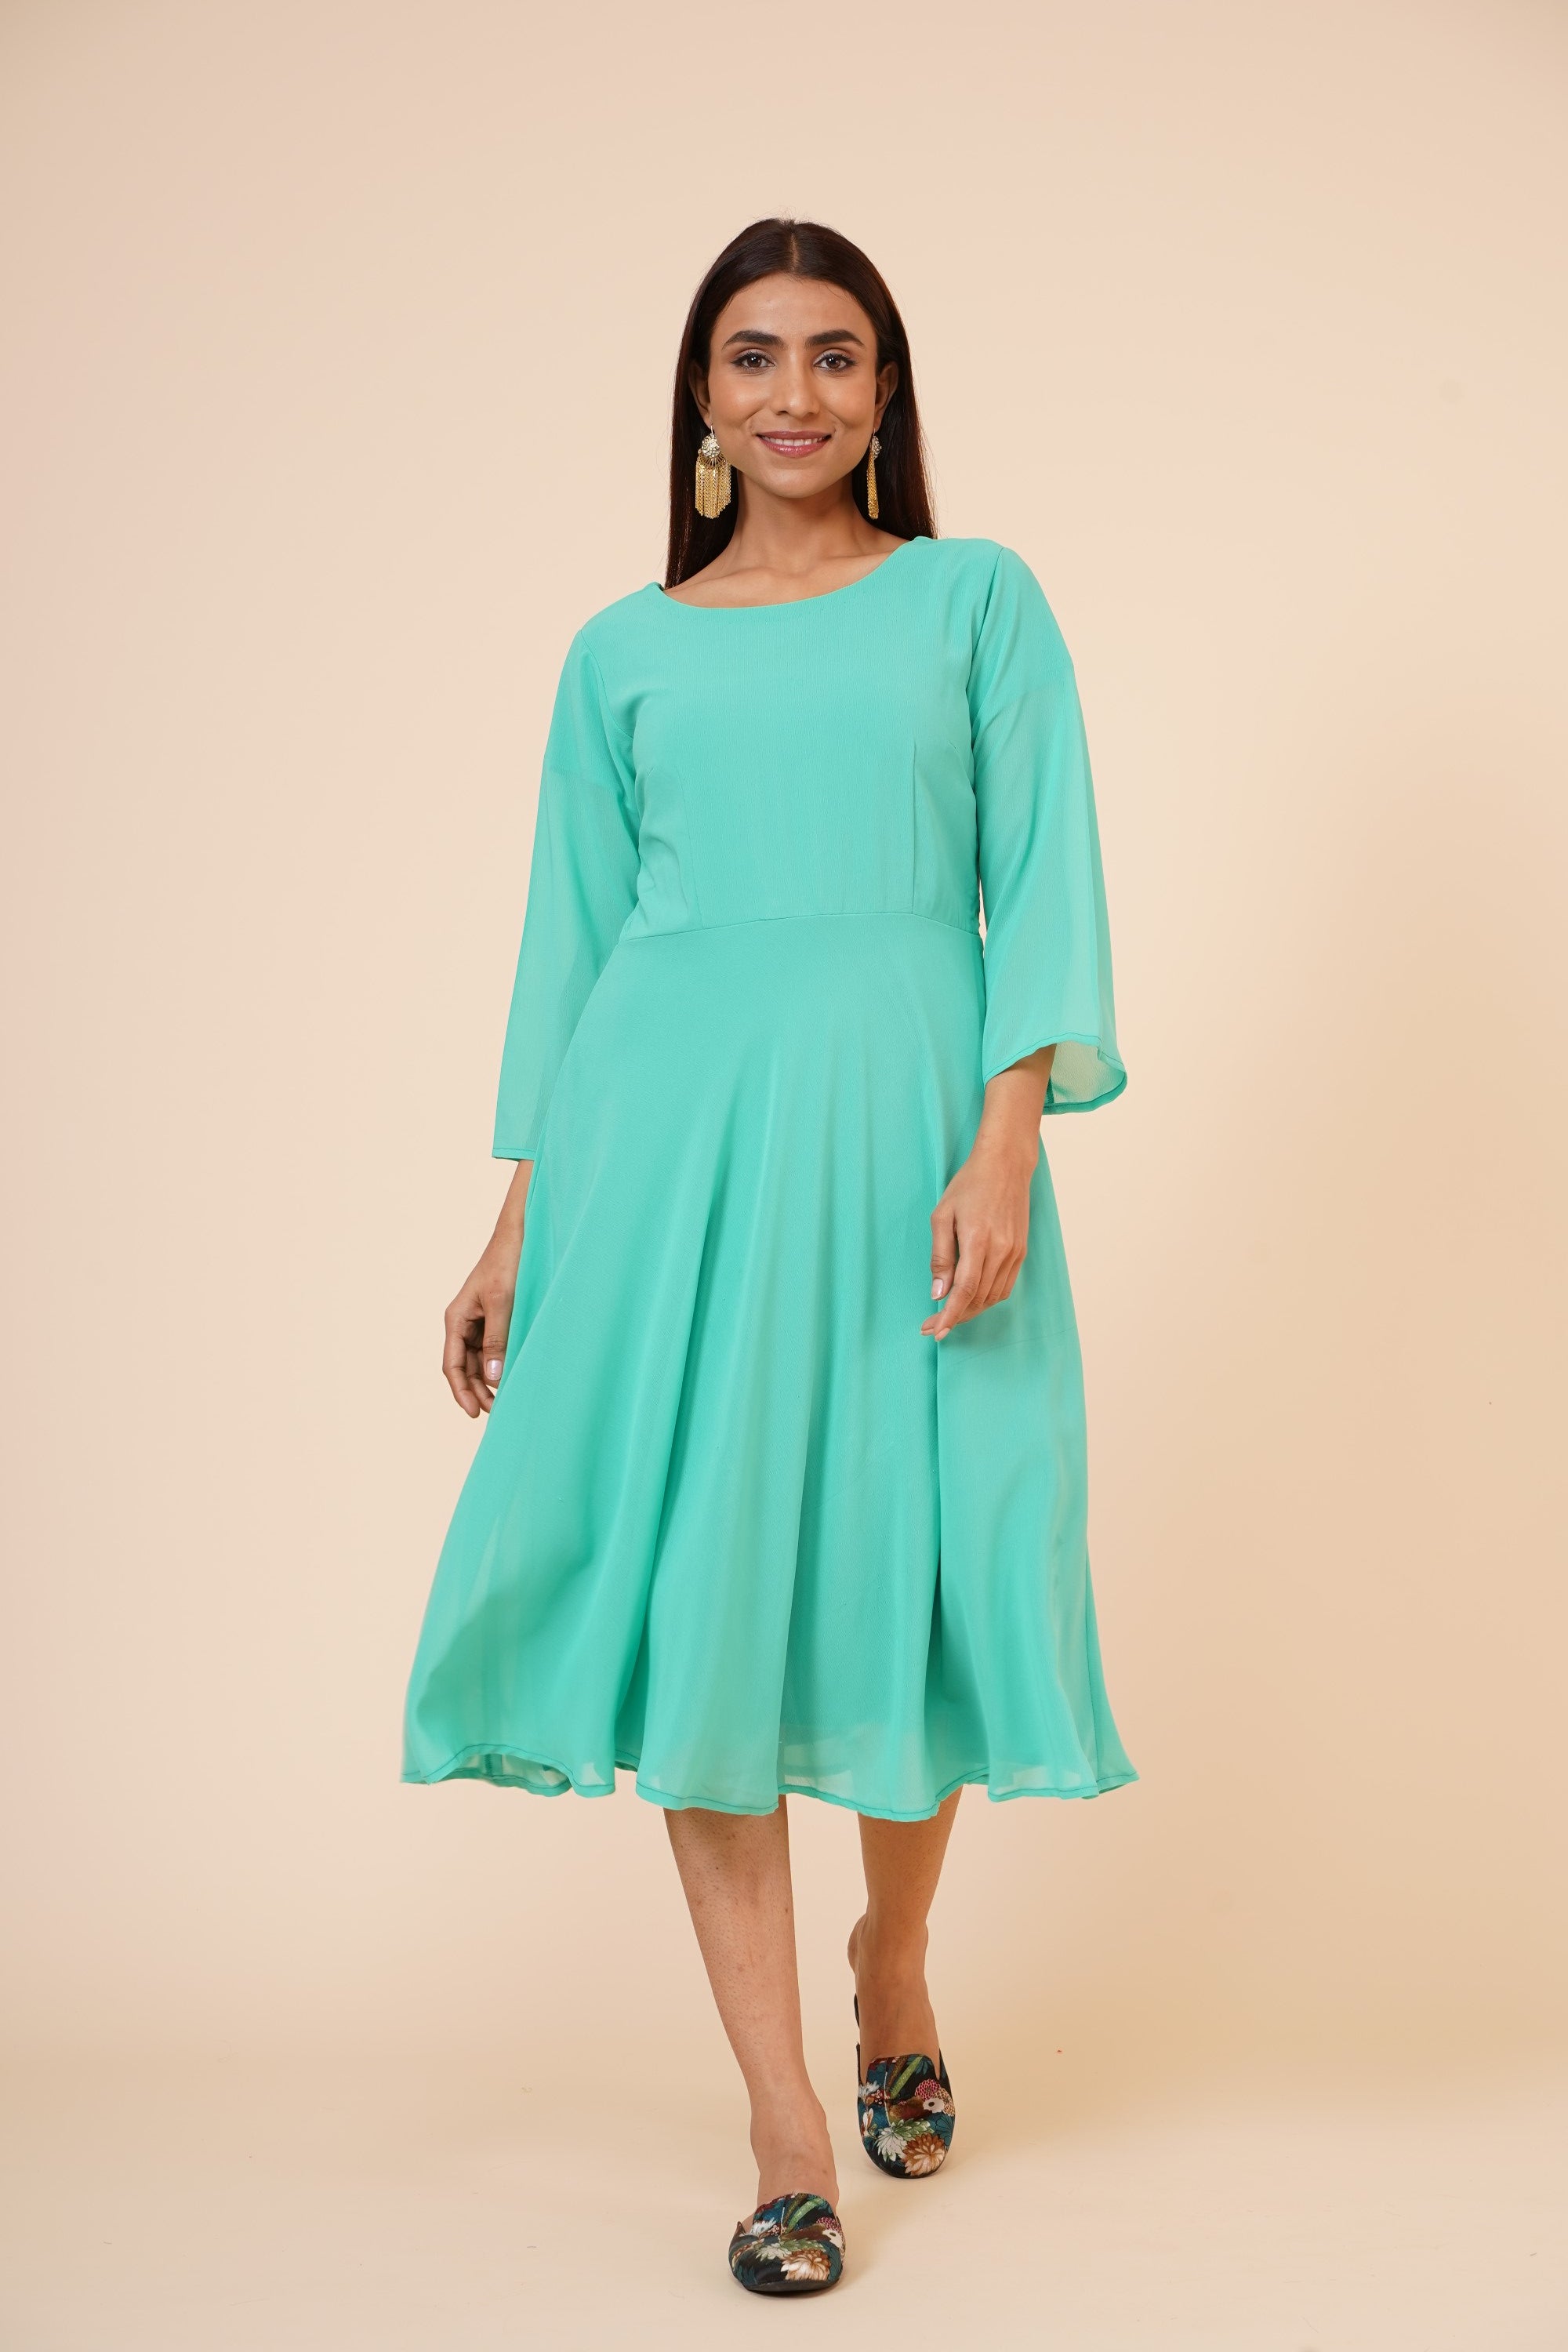 Women's Round Neck Georgette Party/ Casual Dress In Green - MIRACOLOS by Ruchi